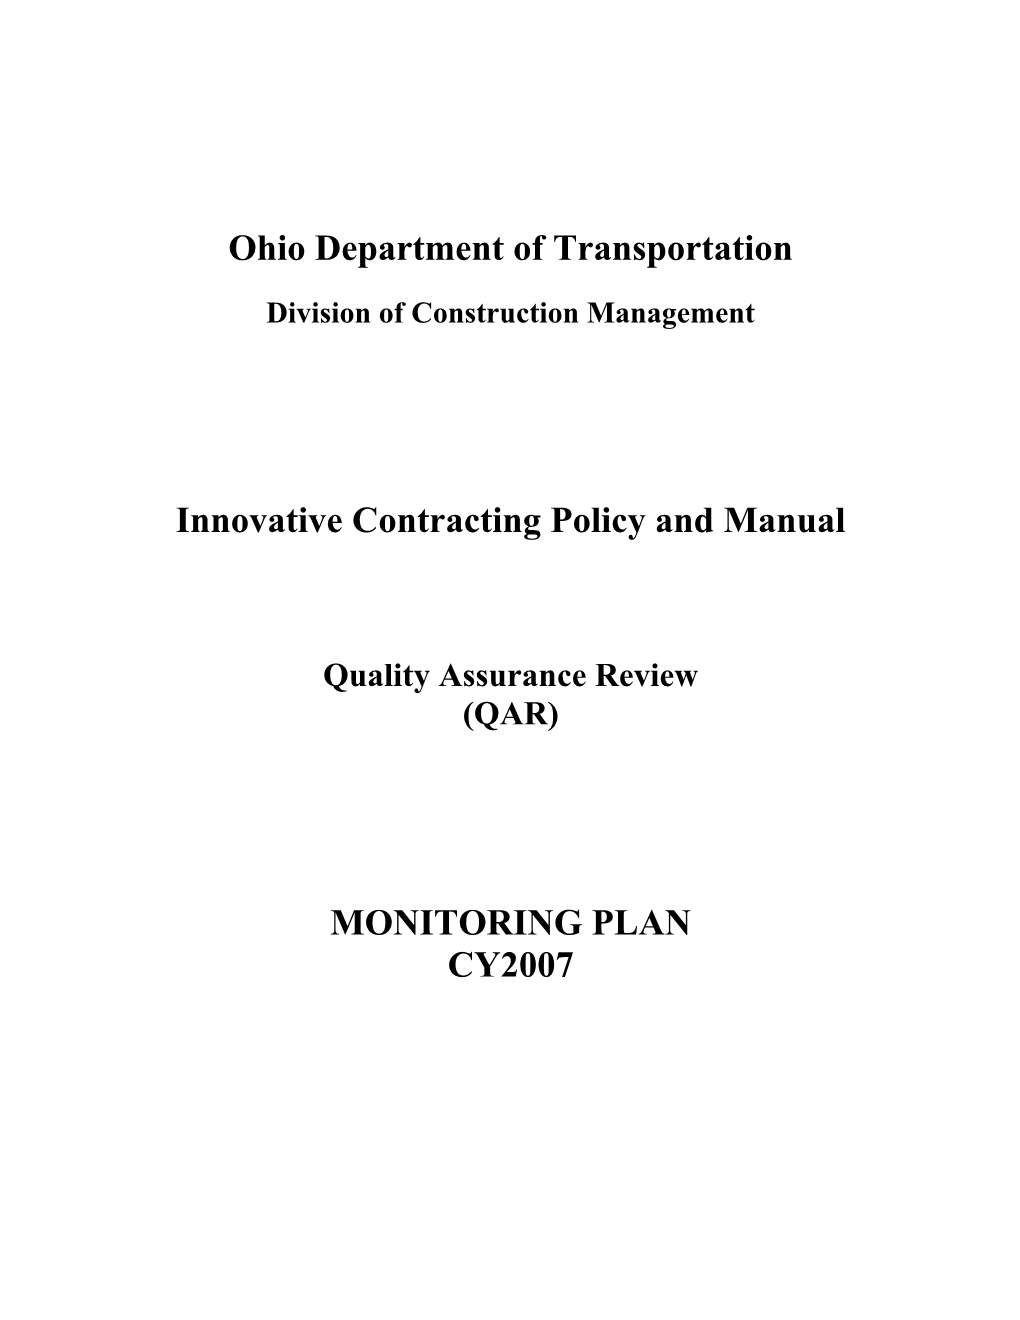 Innovative Contracting Policy and Manual - Quality Assurance Review - Monitoring Plan